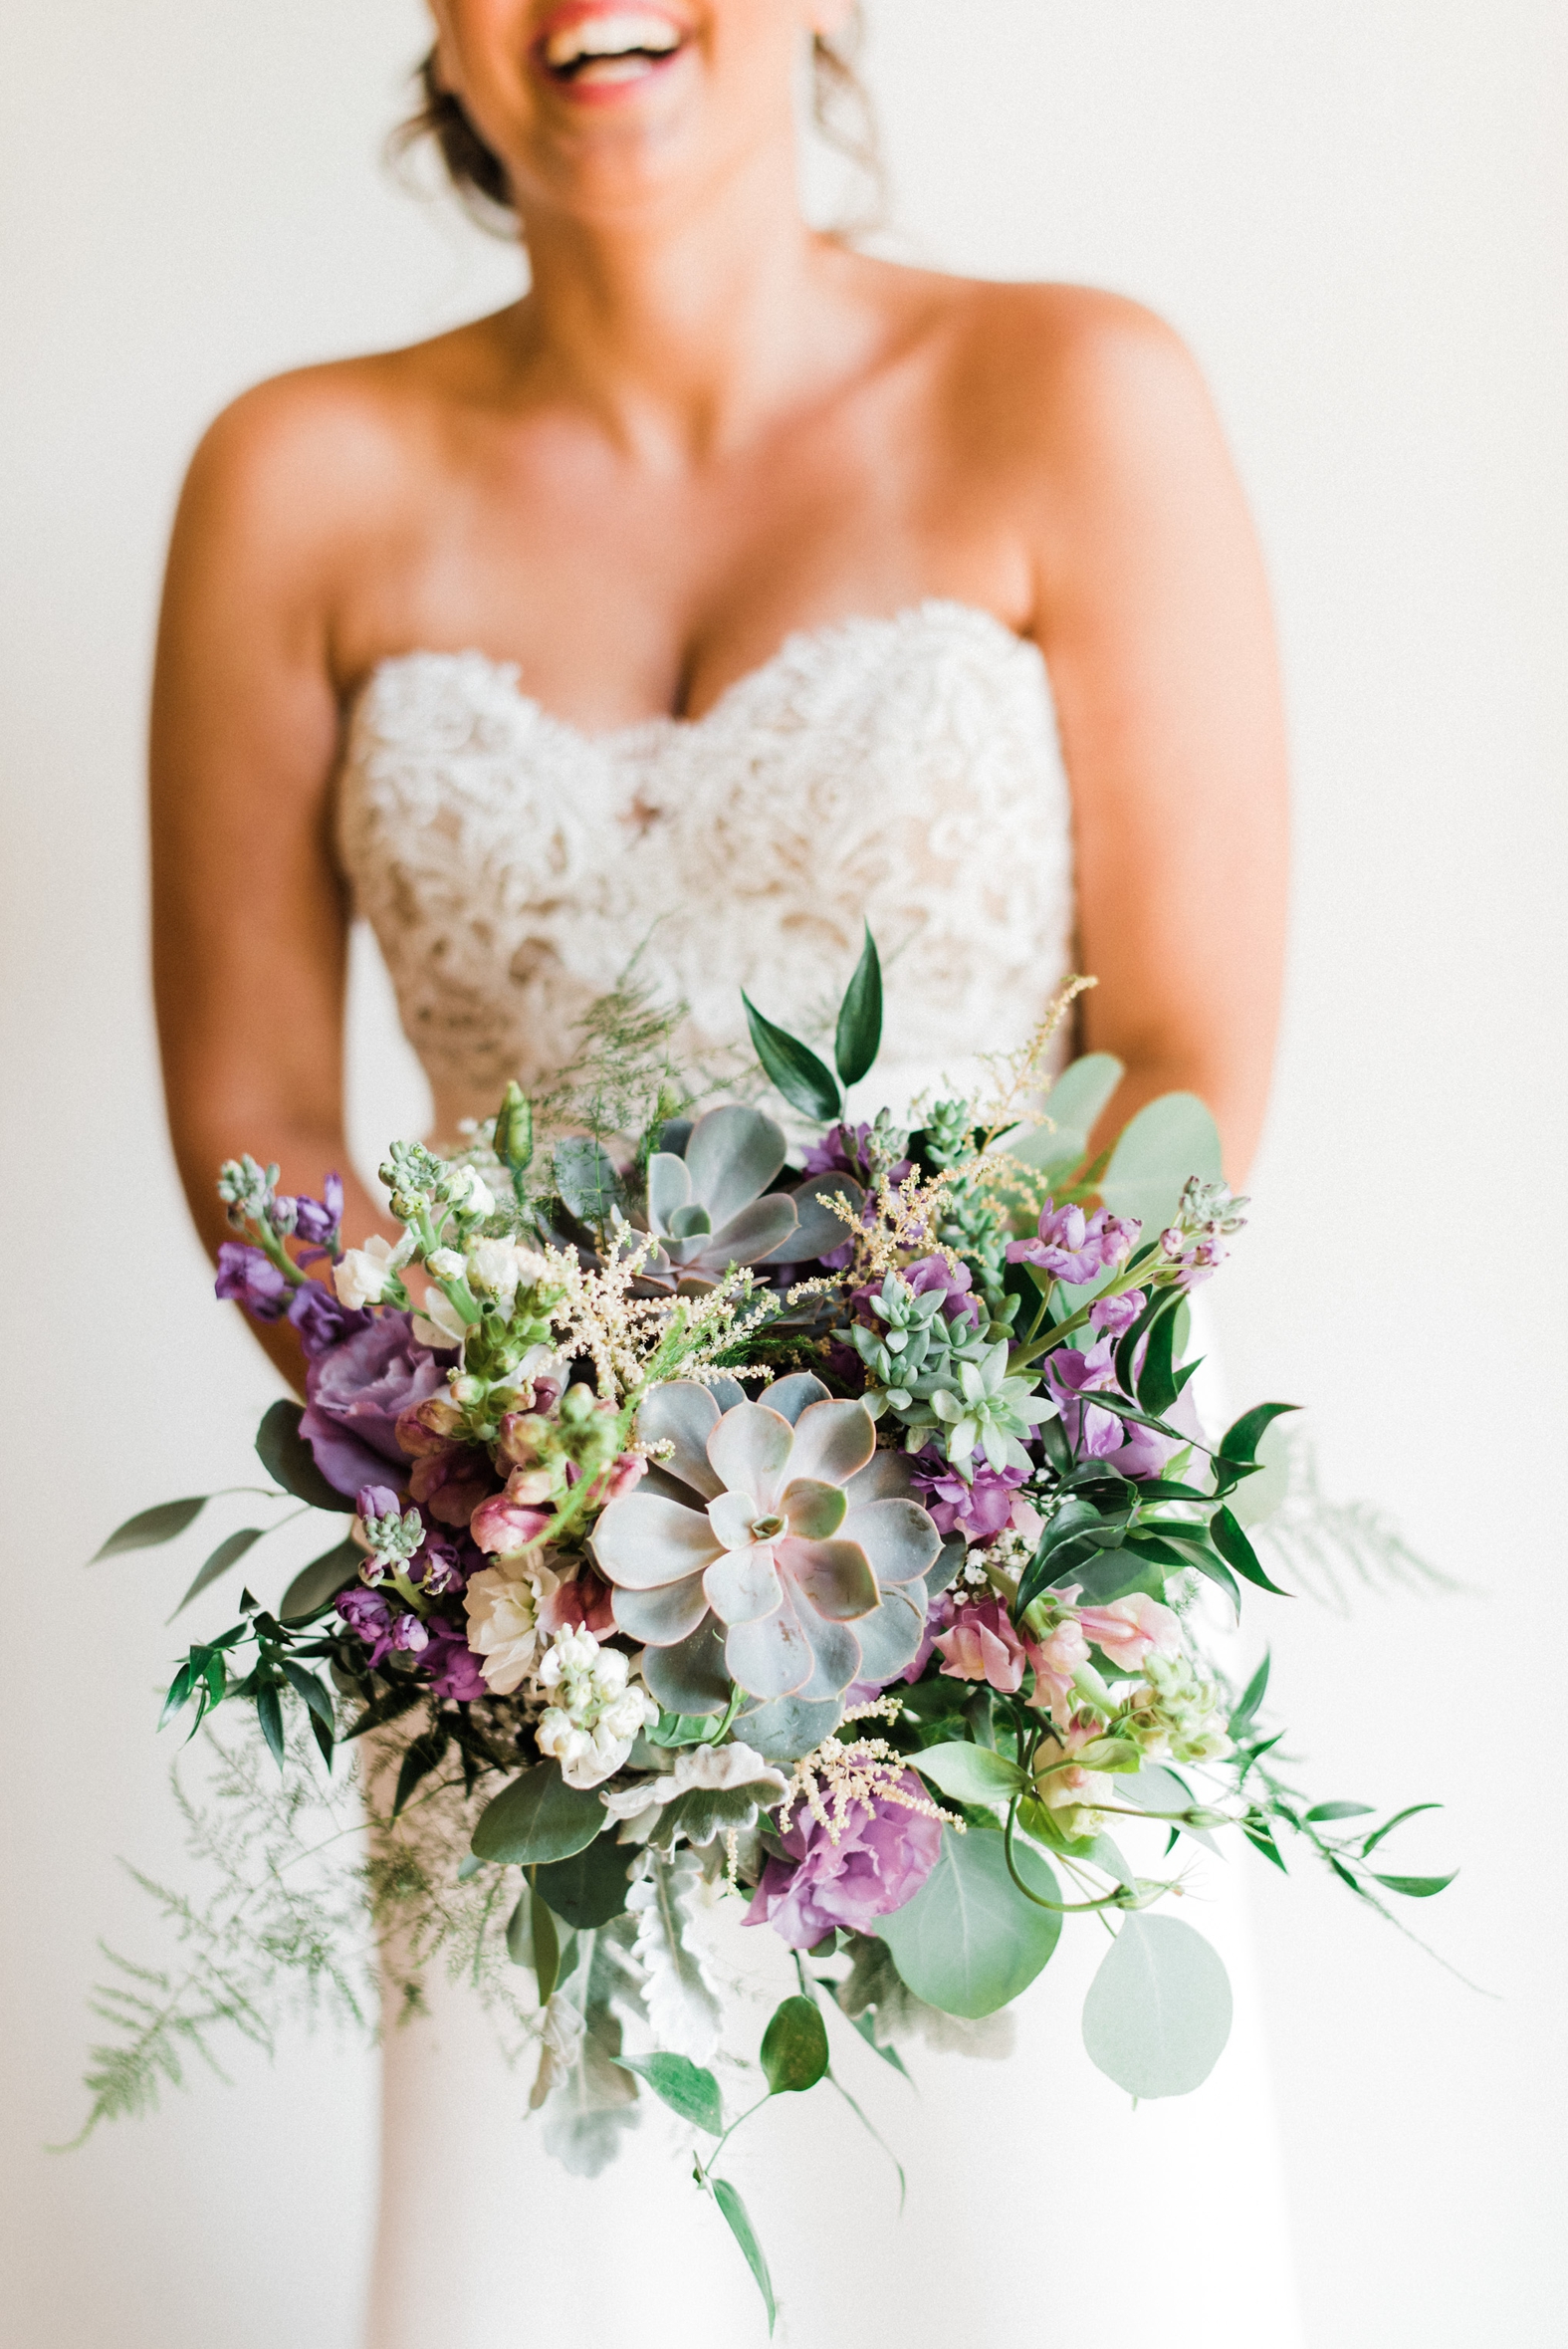 Bride laughing in sweetheart strapless lace wedding gown holding purple, lavender, and greenery bridal bouquet with succulents